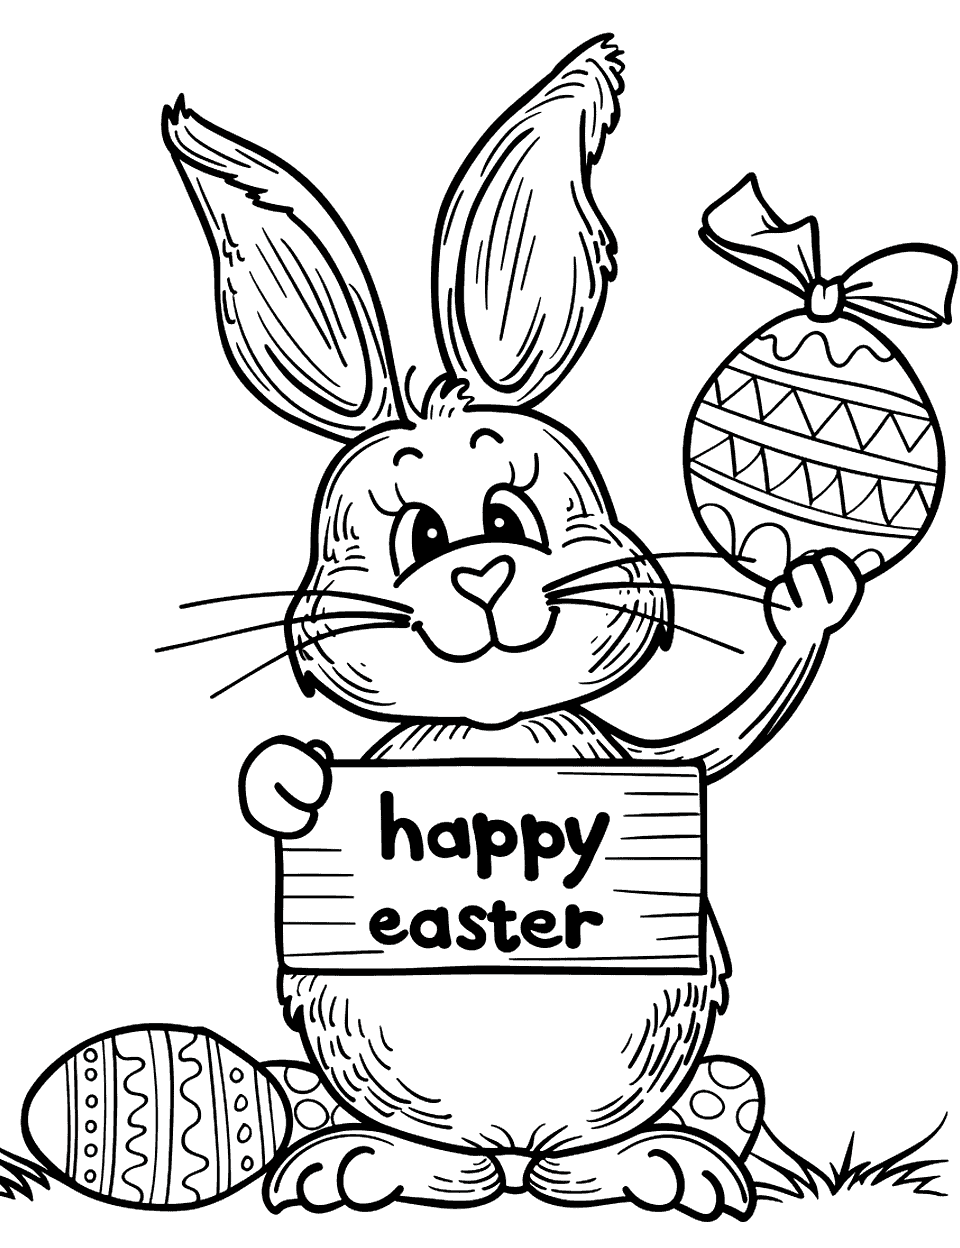 Happy Easter Greeting Bunny Coloring Page - A happy bunny holding a sign that reads “Happy Easter” with Easter eggs around and on its hand.